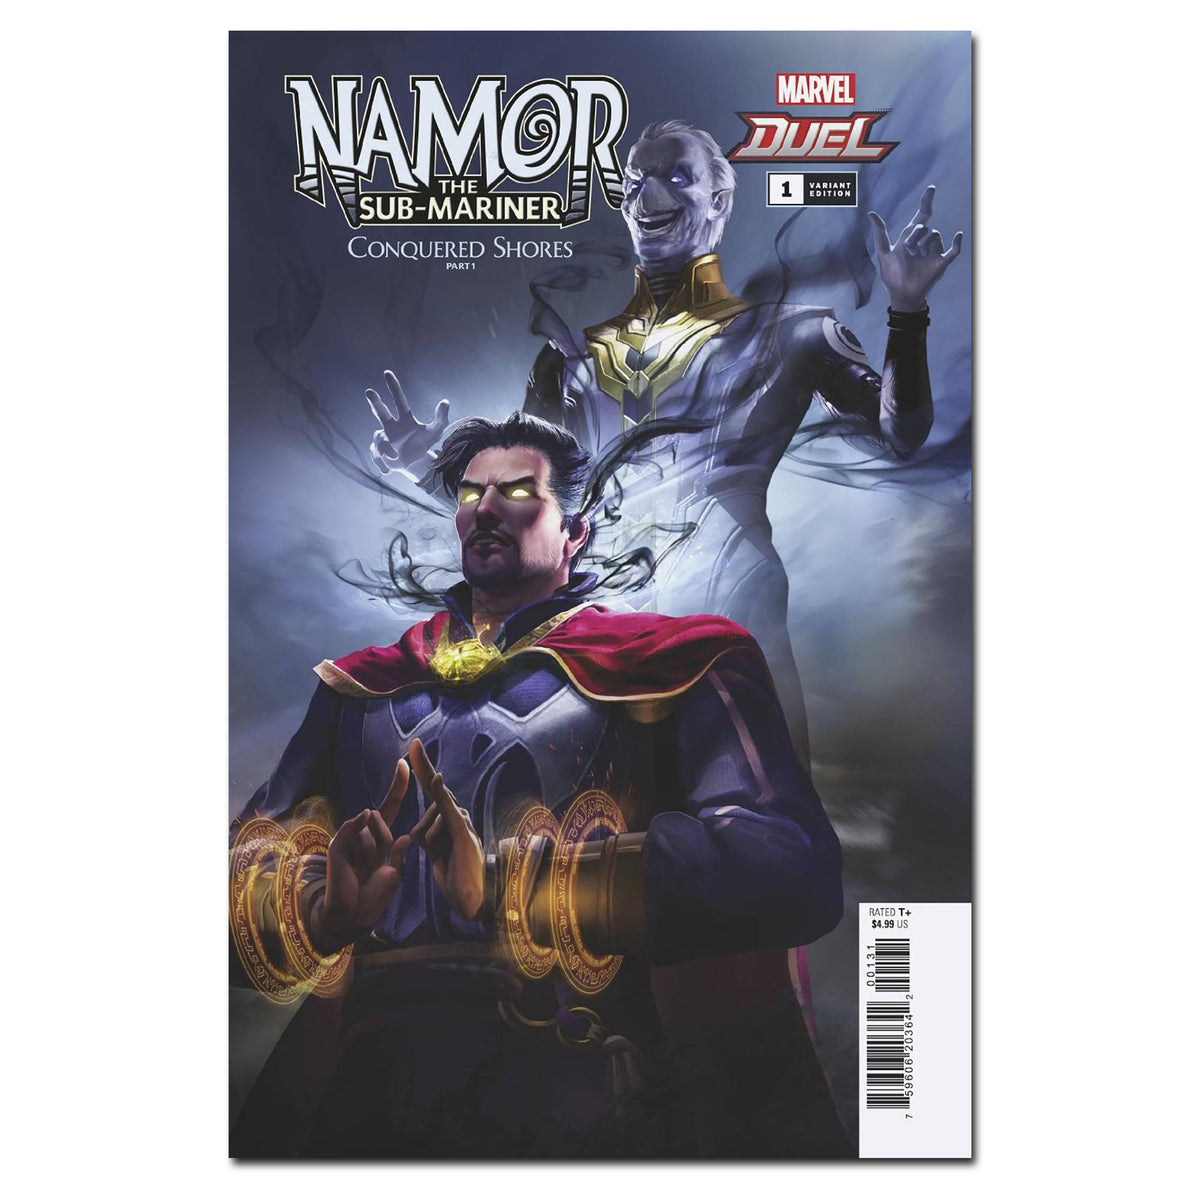 Namor Sub-Mariner Conquered Shores #1 (of 5) Cover Variant NETEASE FINALSALE